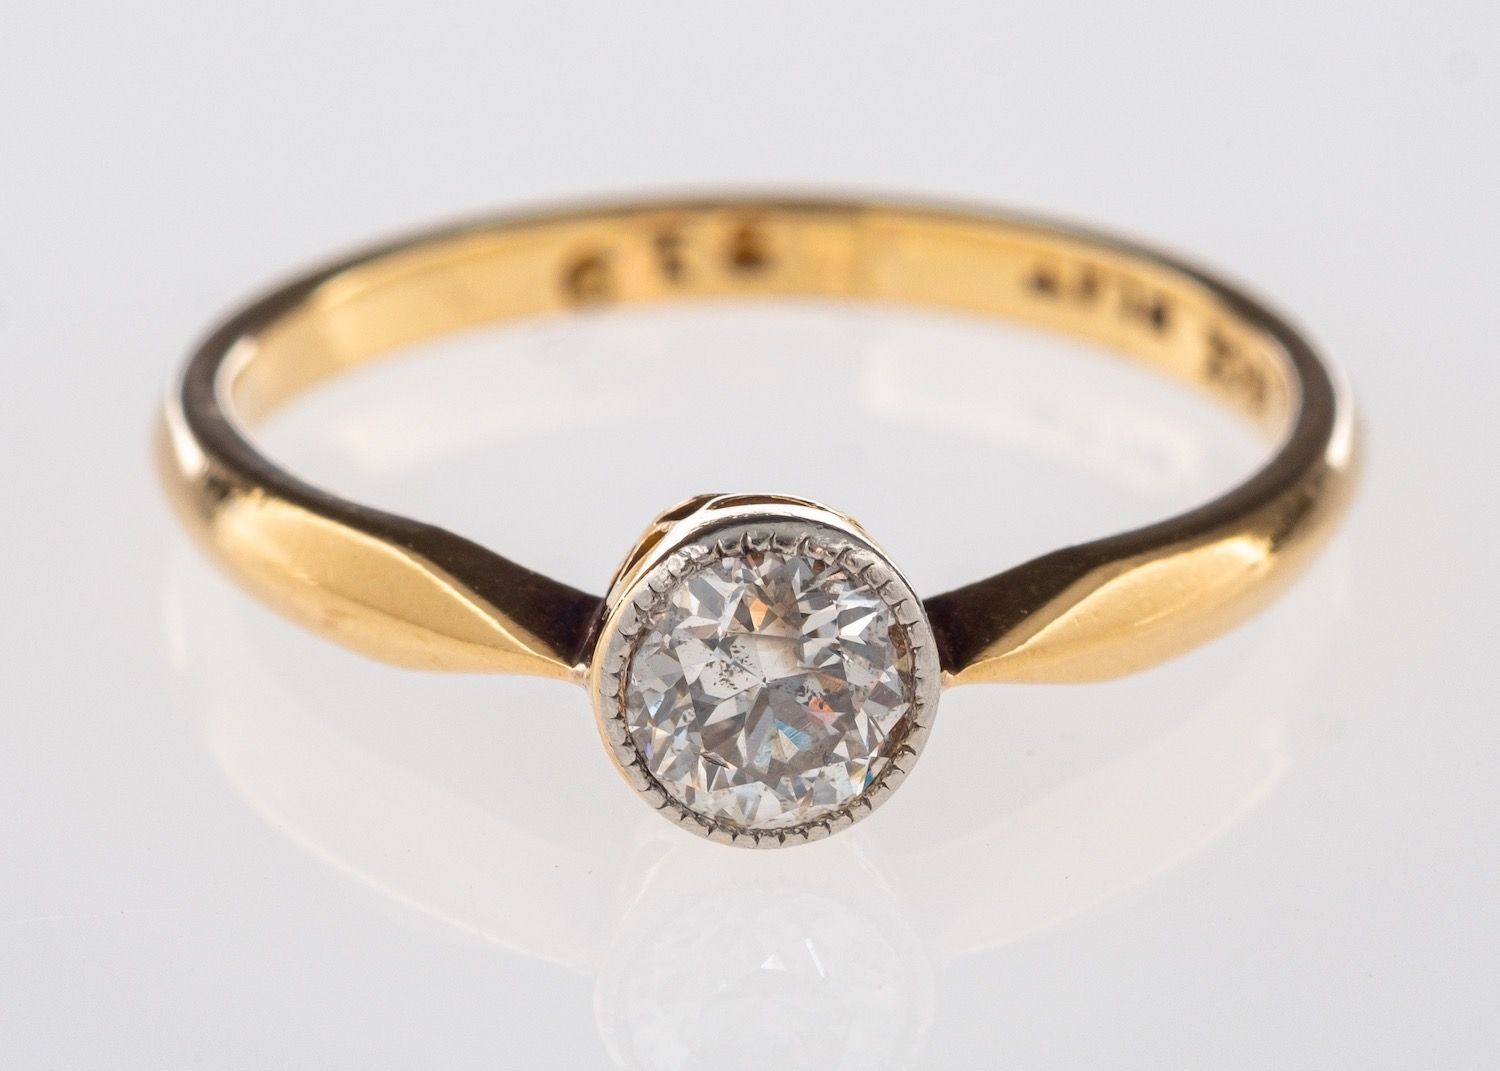 A solitaire ring, milgrain & bezel set with an old brilliant-cut diamond, diamond approx. 0.